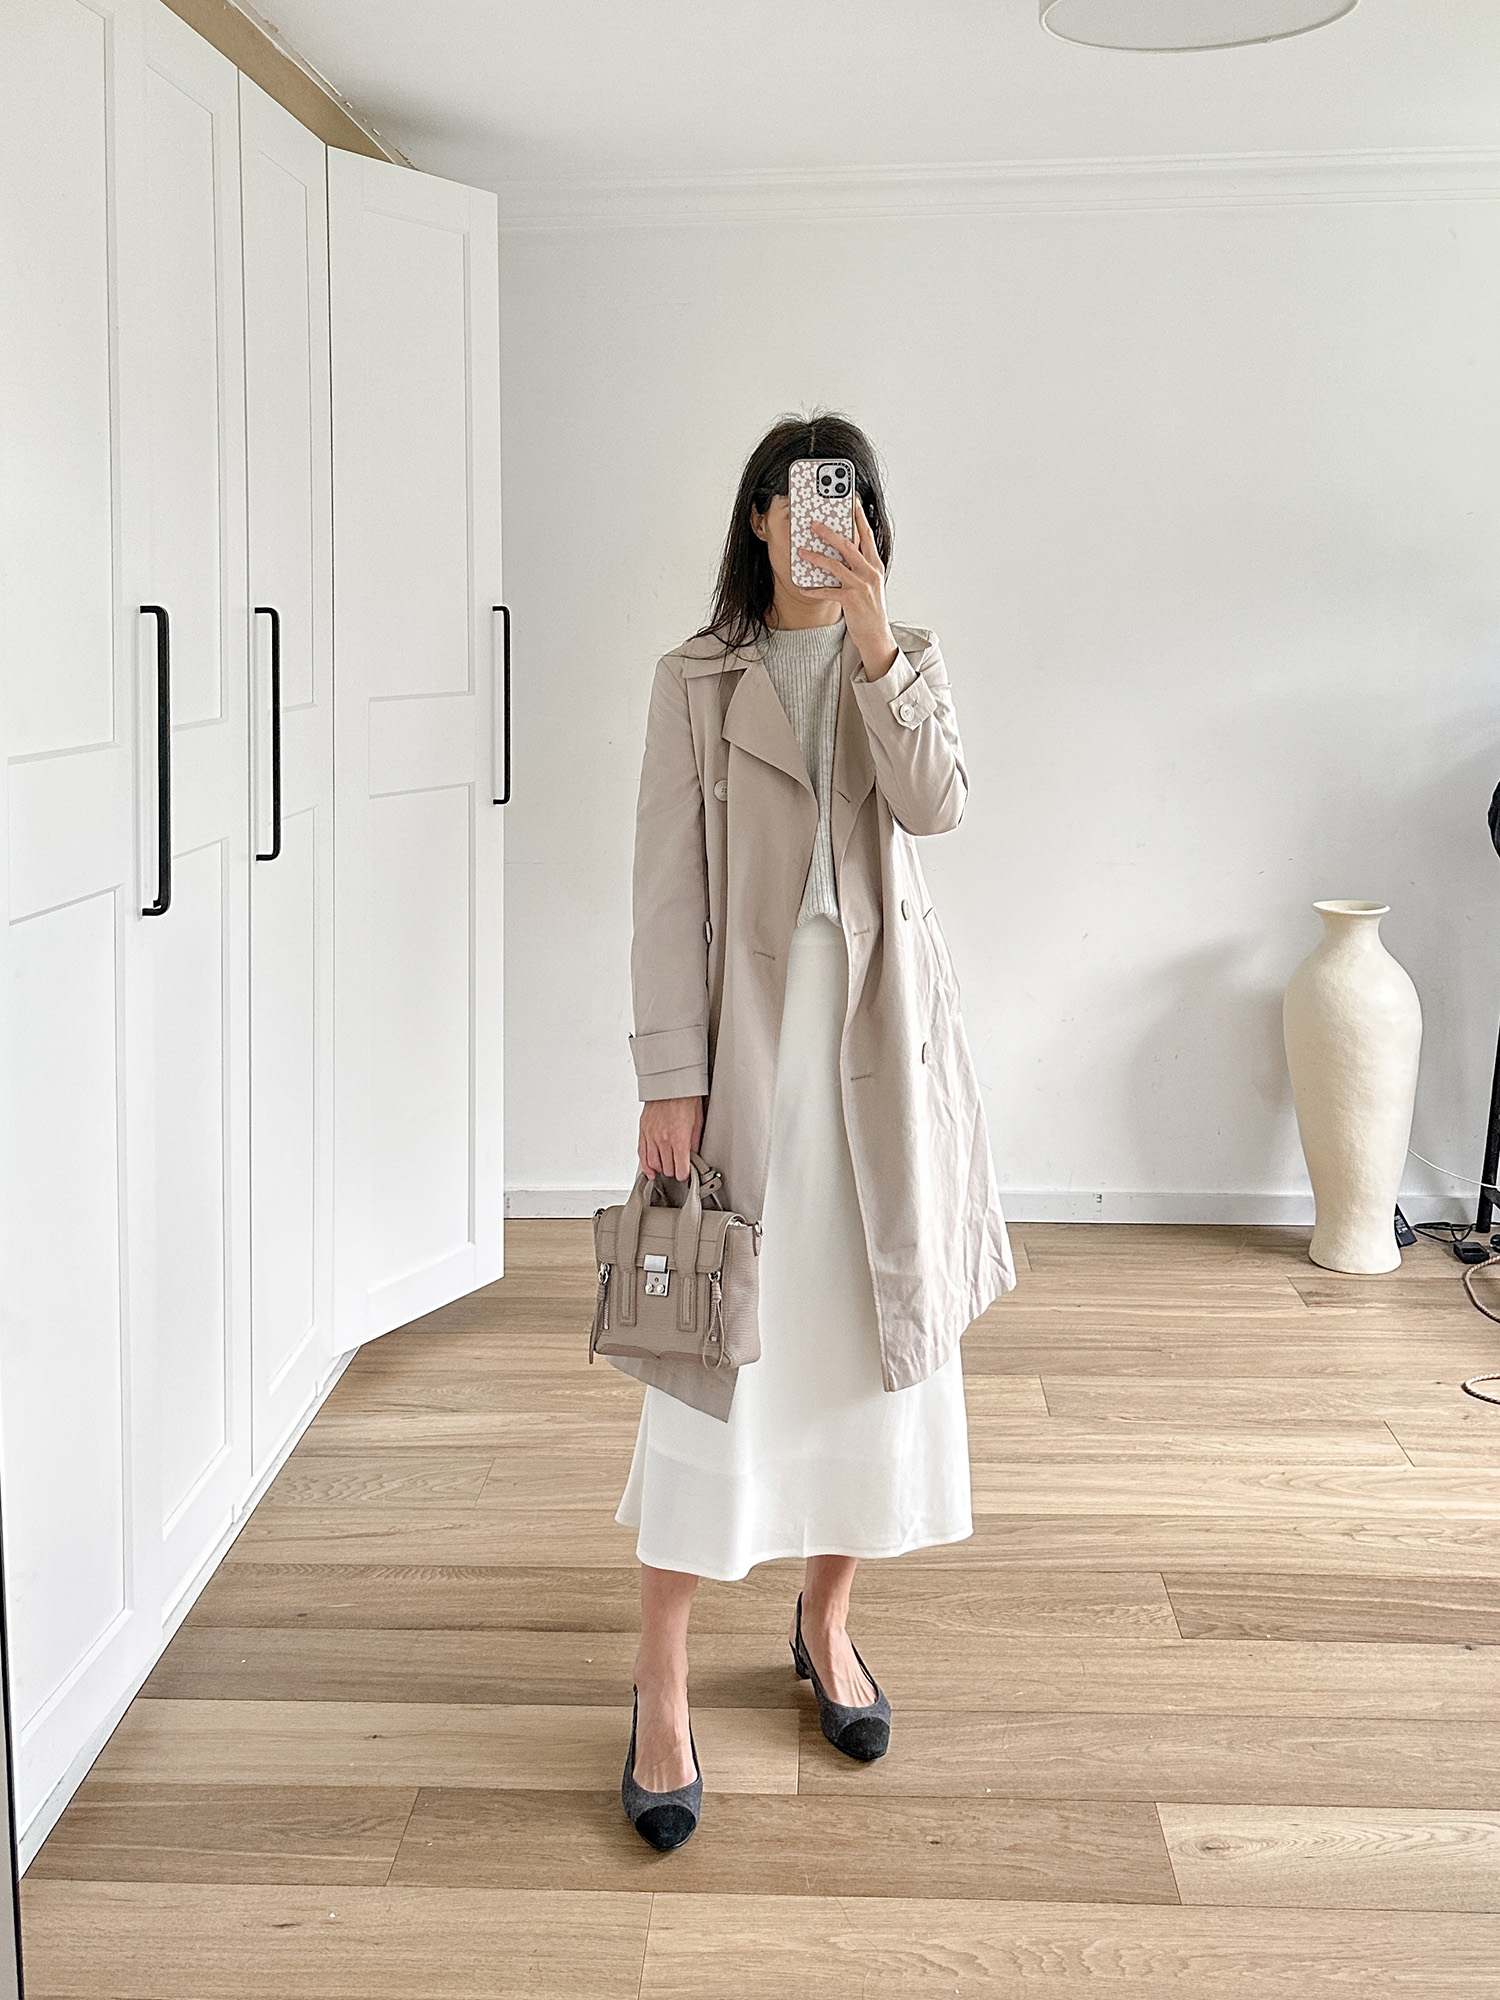 Wearing The Curated cashmere sweater with Marks and Spencer midi skirt and trench coat